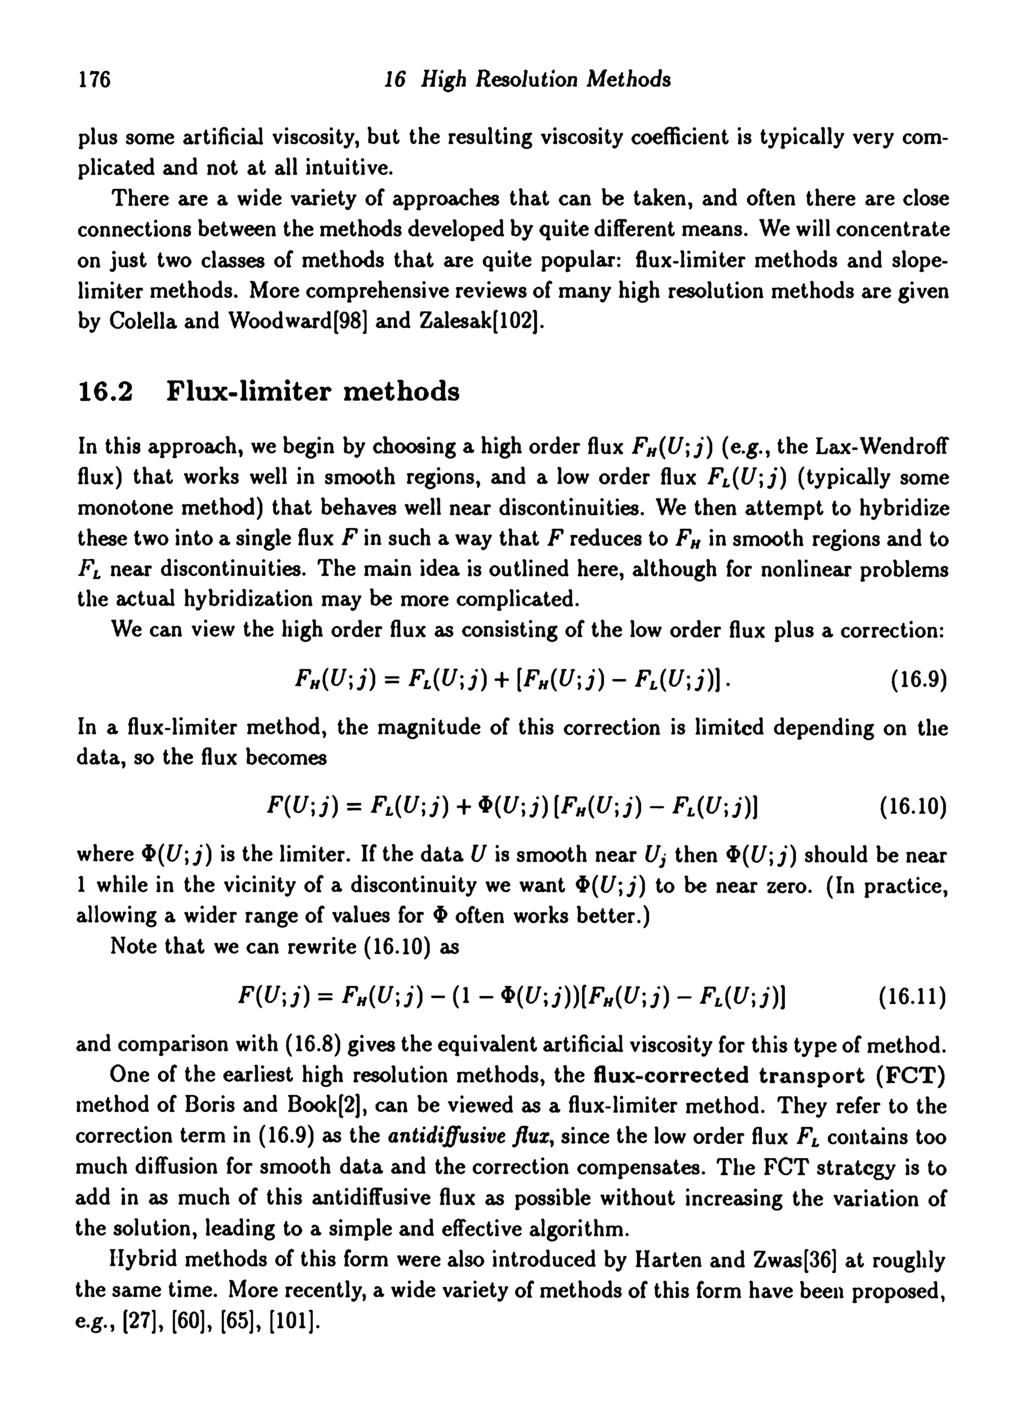 Flux-limiting methods Linear in Godunov s theorem means a scheme where the scheme itself (flux function, coefficients etc.) are constant, i.